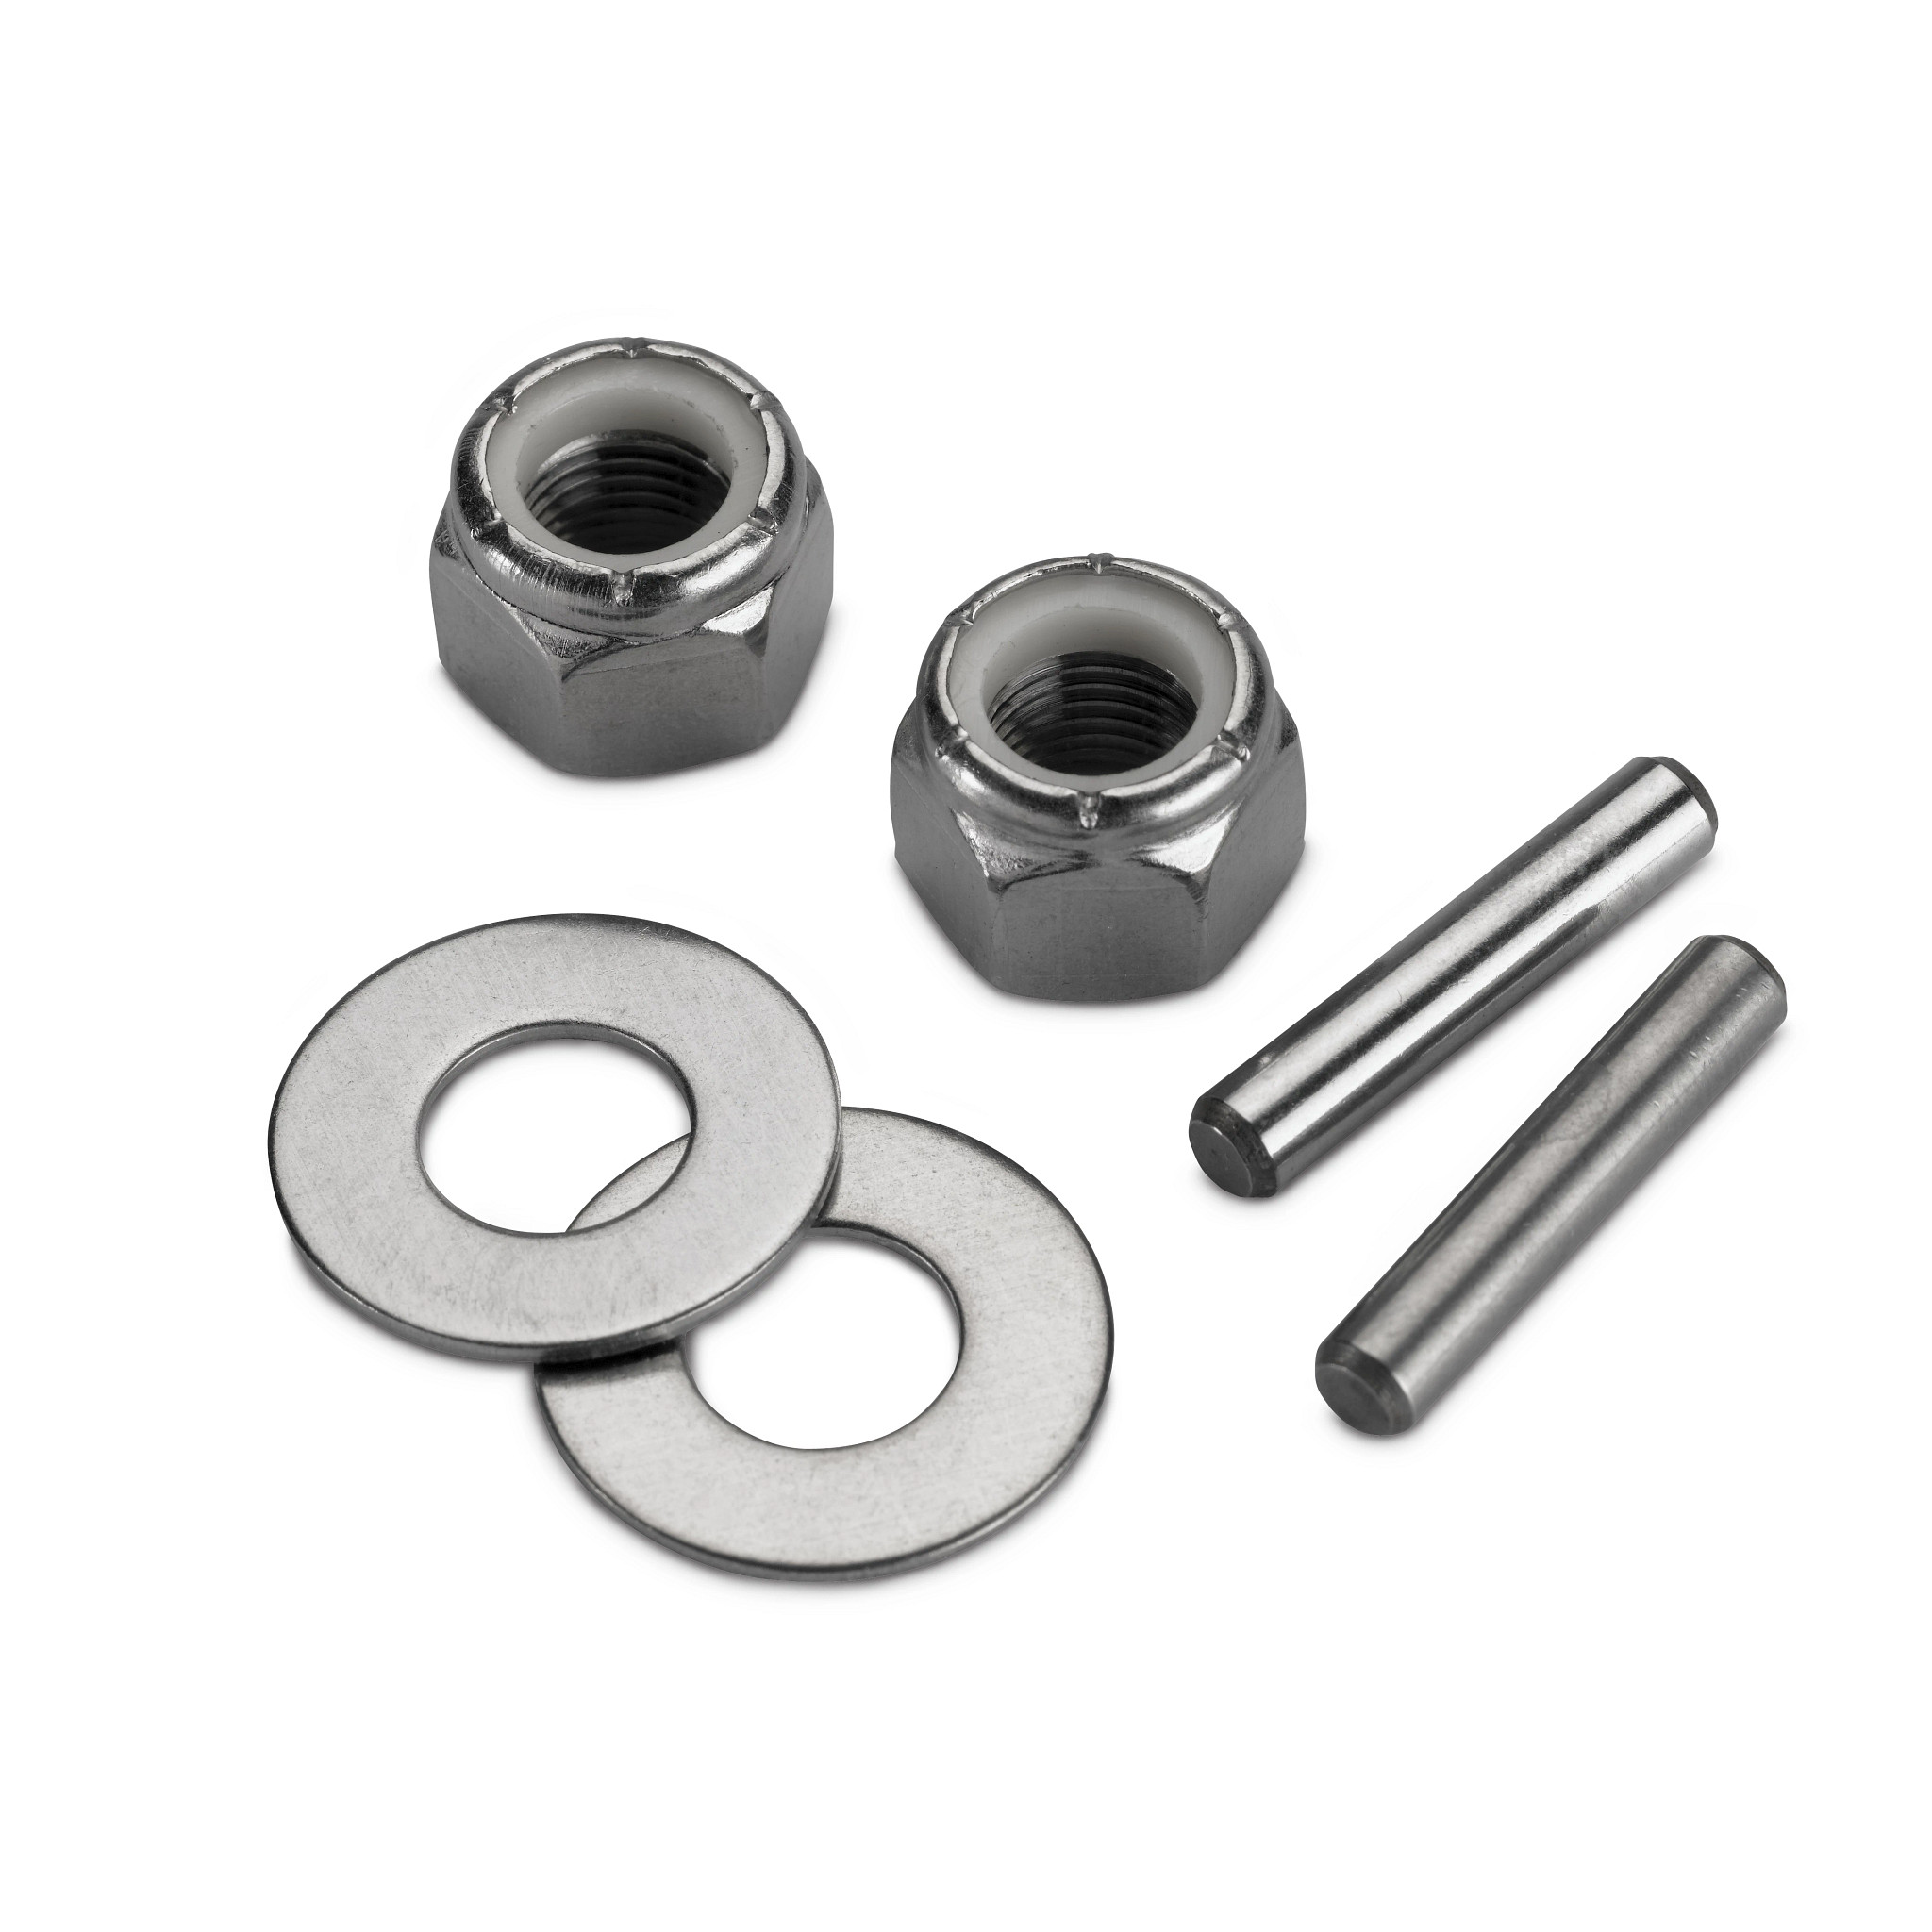 Minn MKP-34 Prop/Nut Replacement Parts Kit E One Size 1865019 